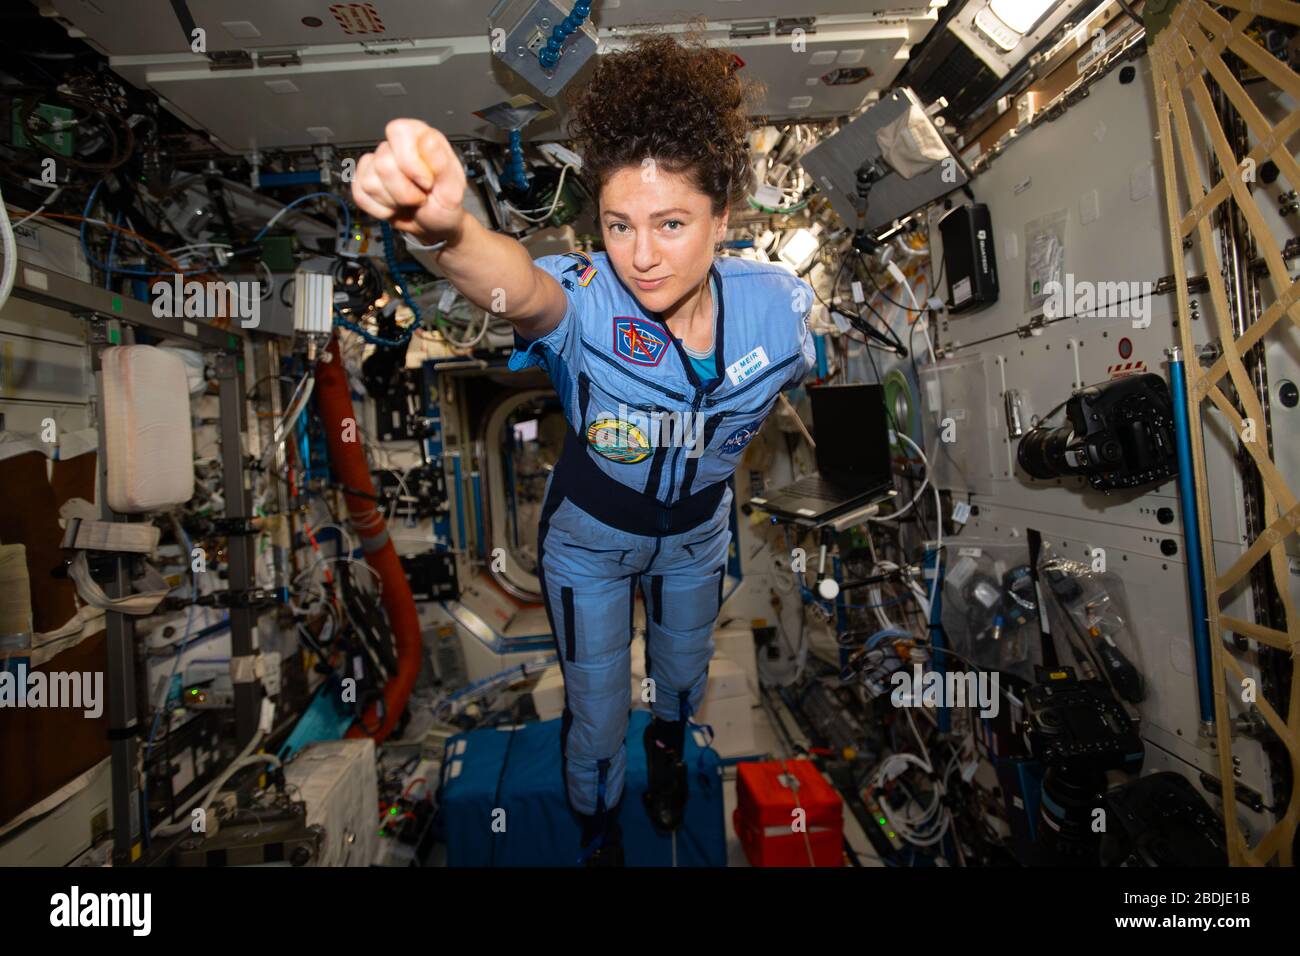 ISS - 29 March 2020 - NASA astronaut and Expedition 62 Flight Engineer Jessica Meir strikes a superhero pose in the weightless environment of the Inte Stock Photo